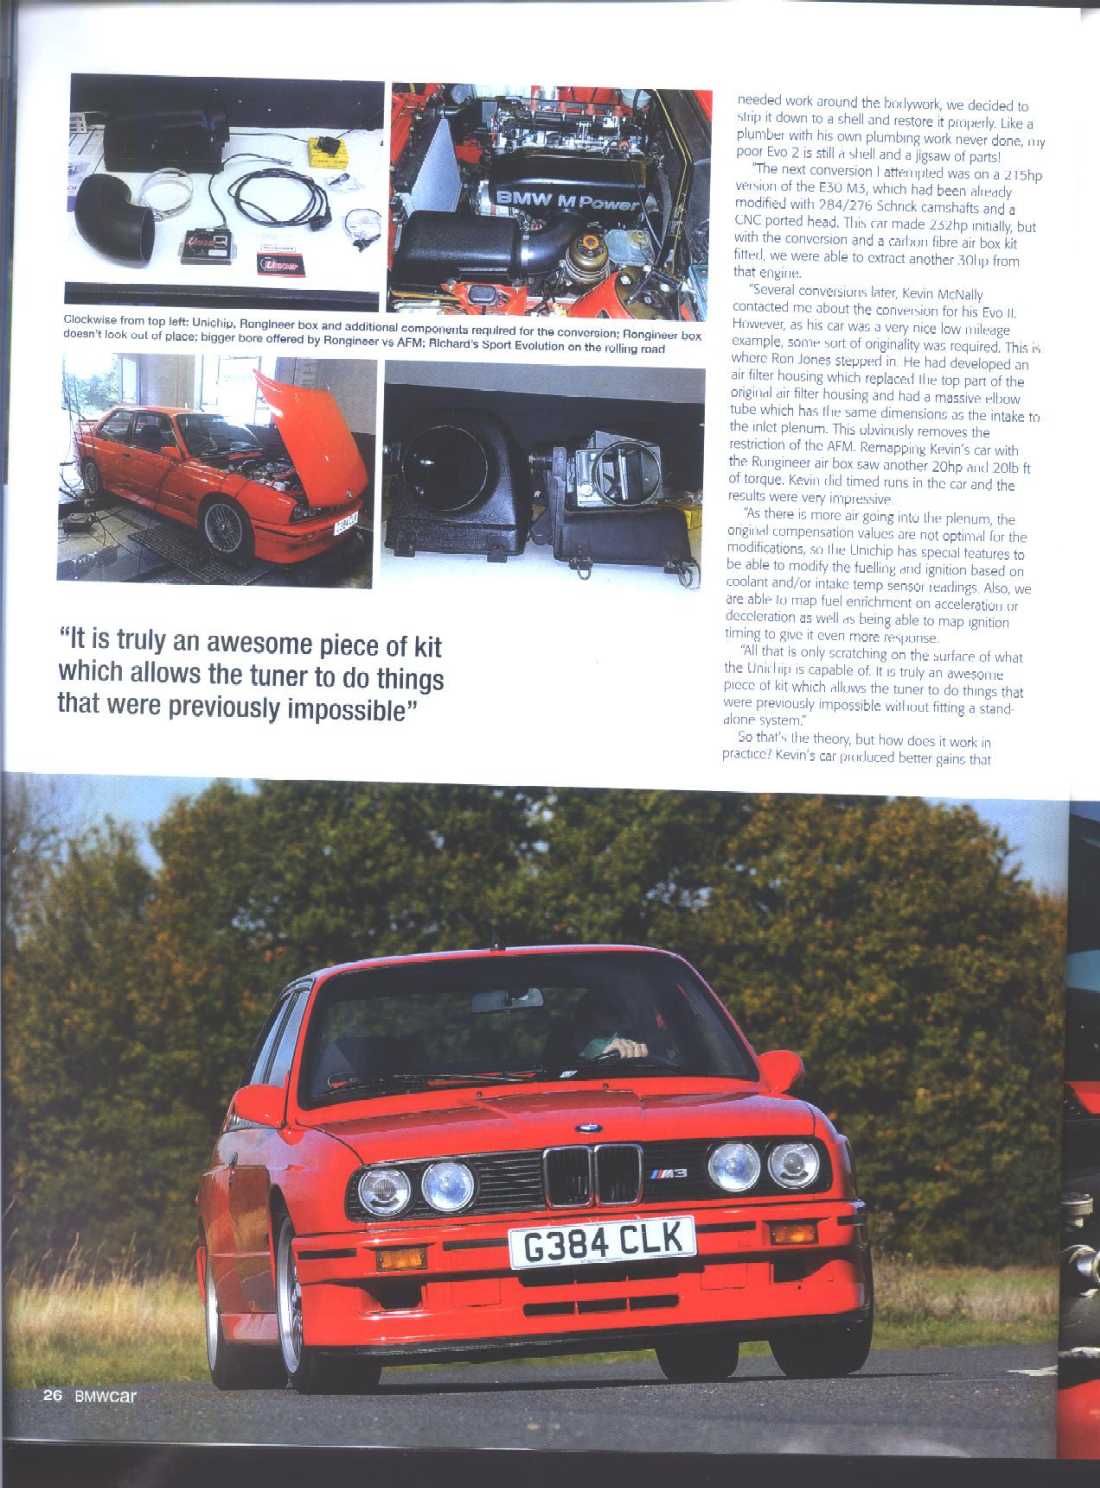 Page 5 of BMWCar magazine featuring the Rongineer M3 Airbox Kit